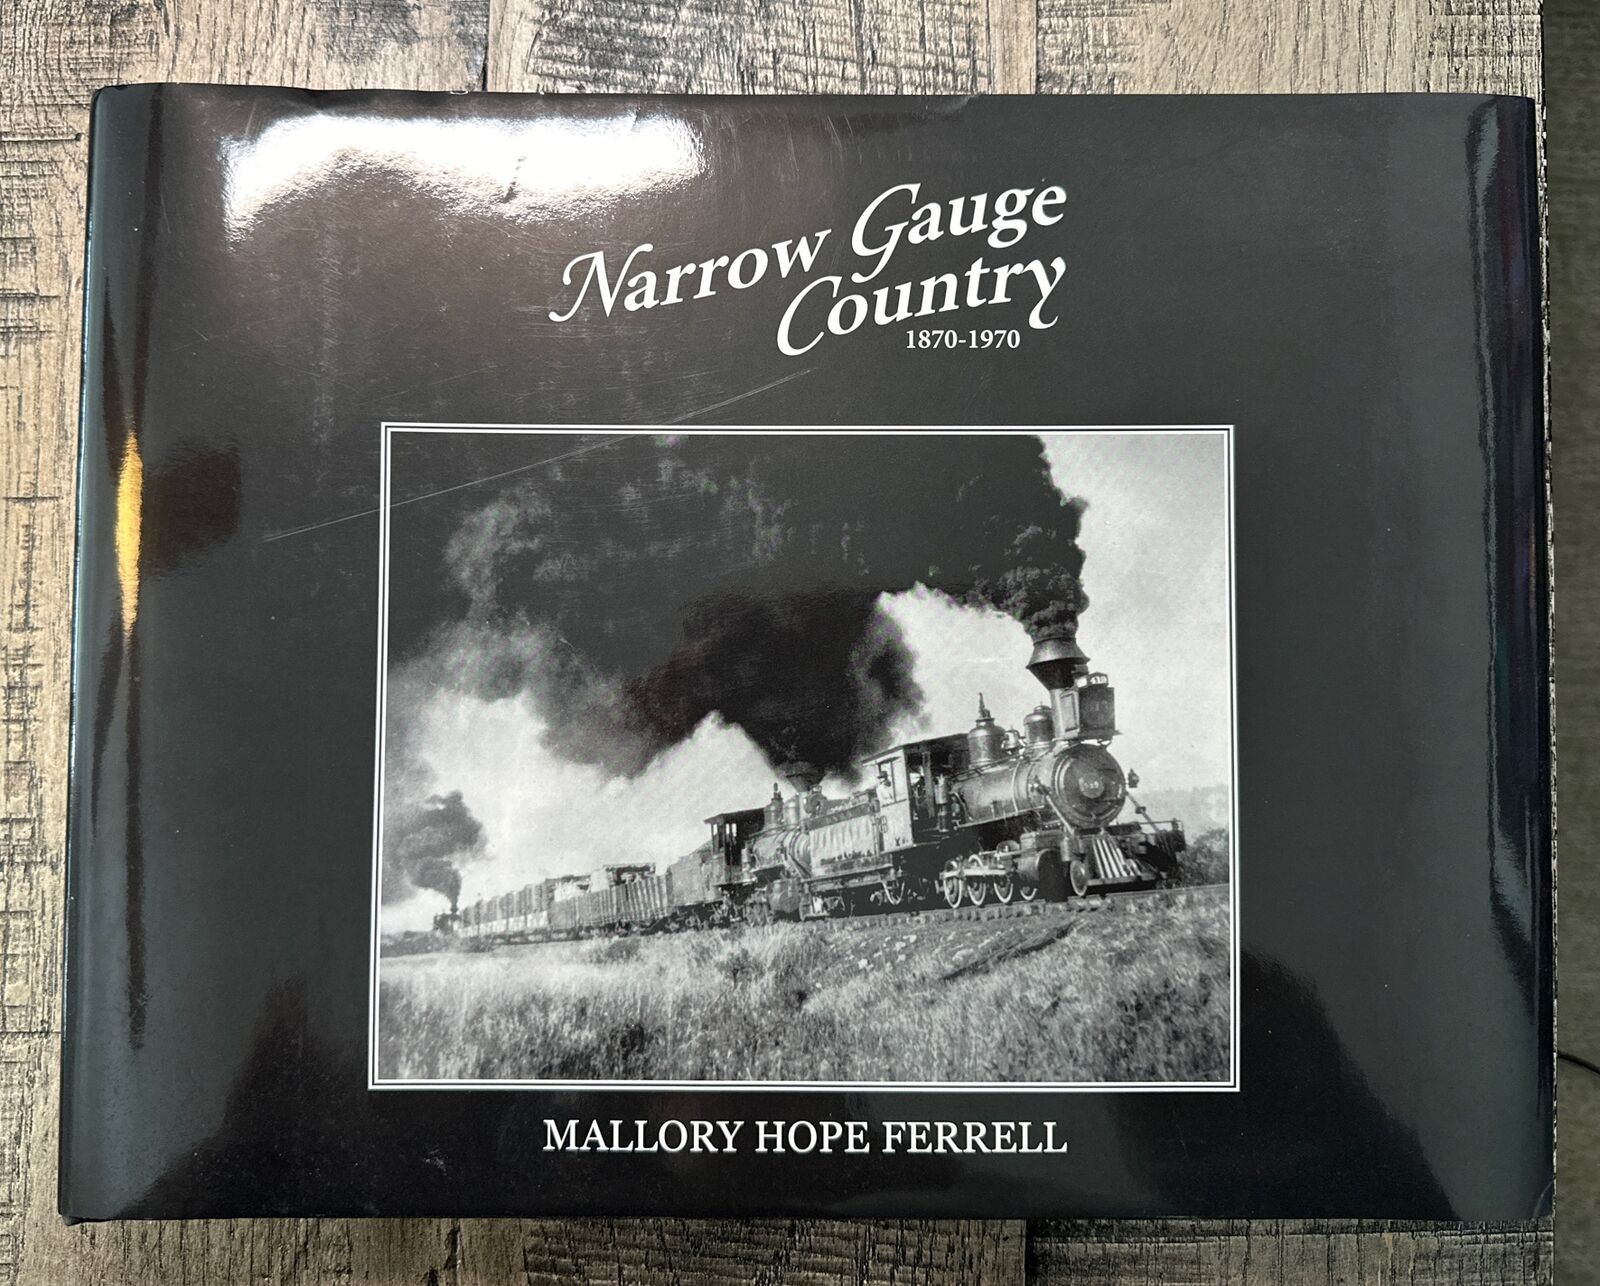 NARROW GAUGE COUNTRY 1870-1970 Railroad Pictorial by Mallory Hope Ferrell HC